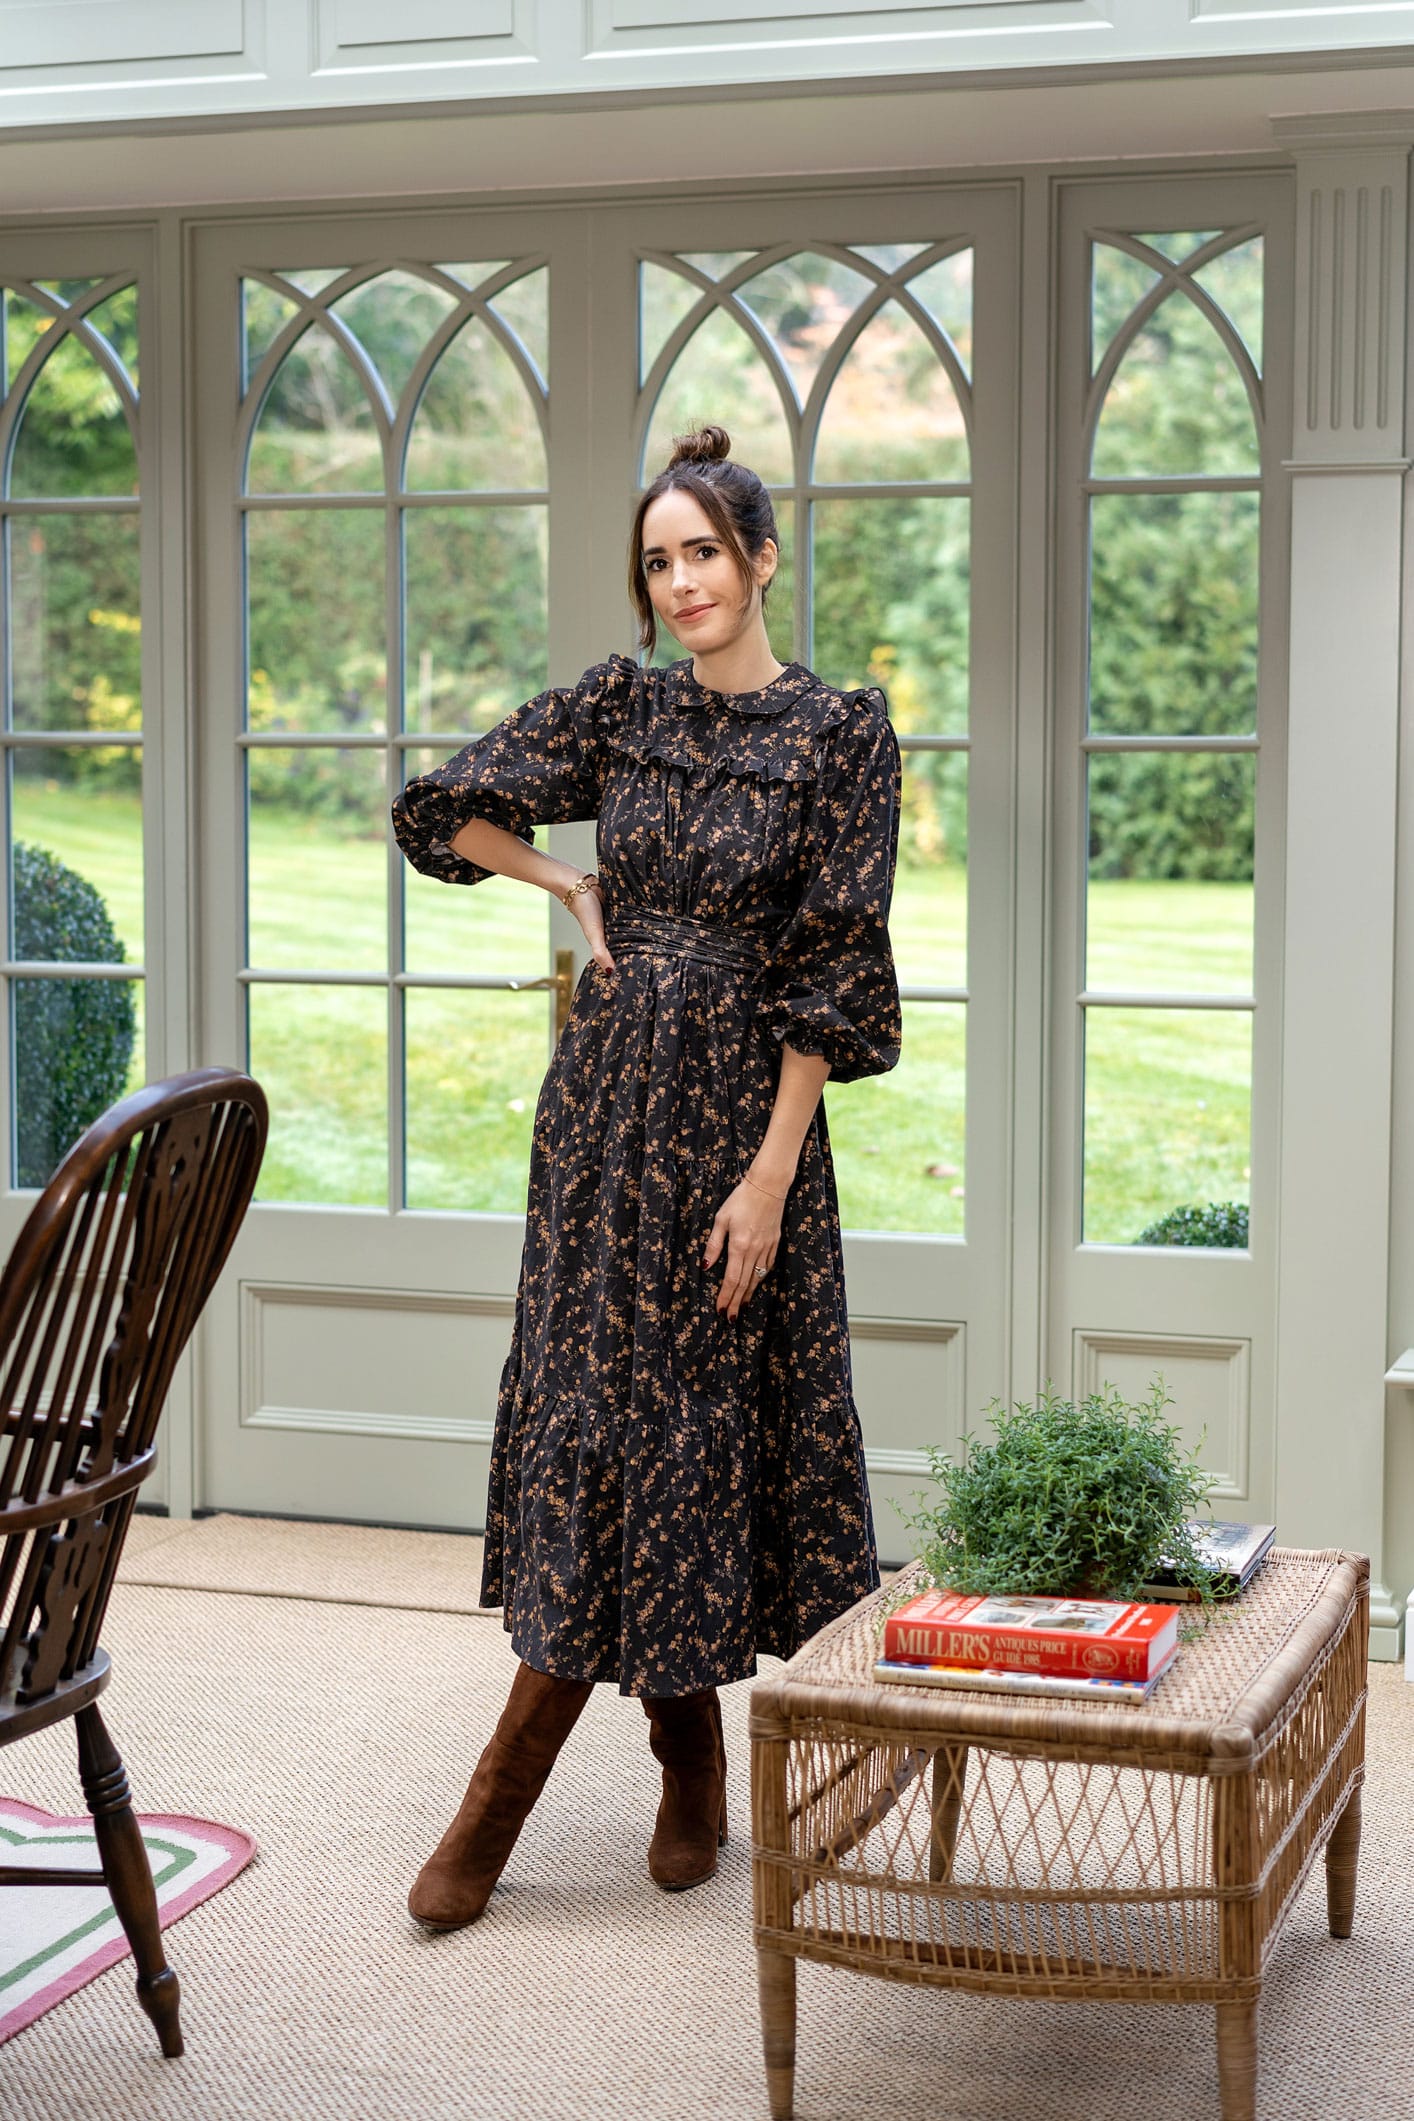 Louise Roe of Front Roe reveals her Orangery